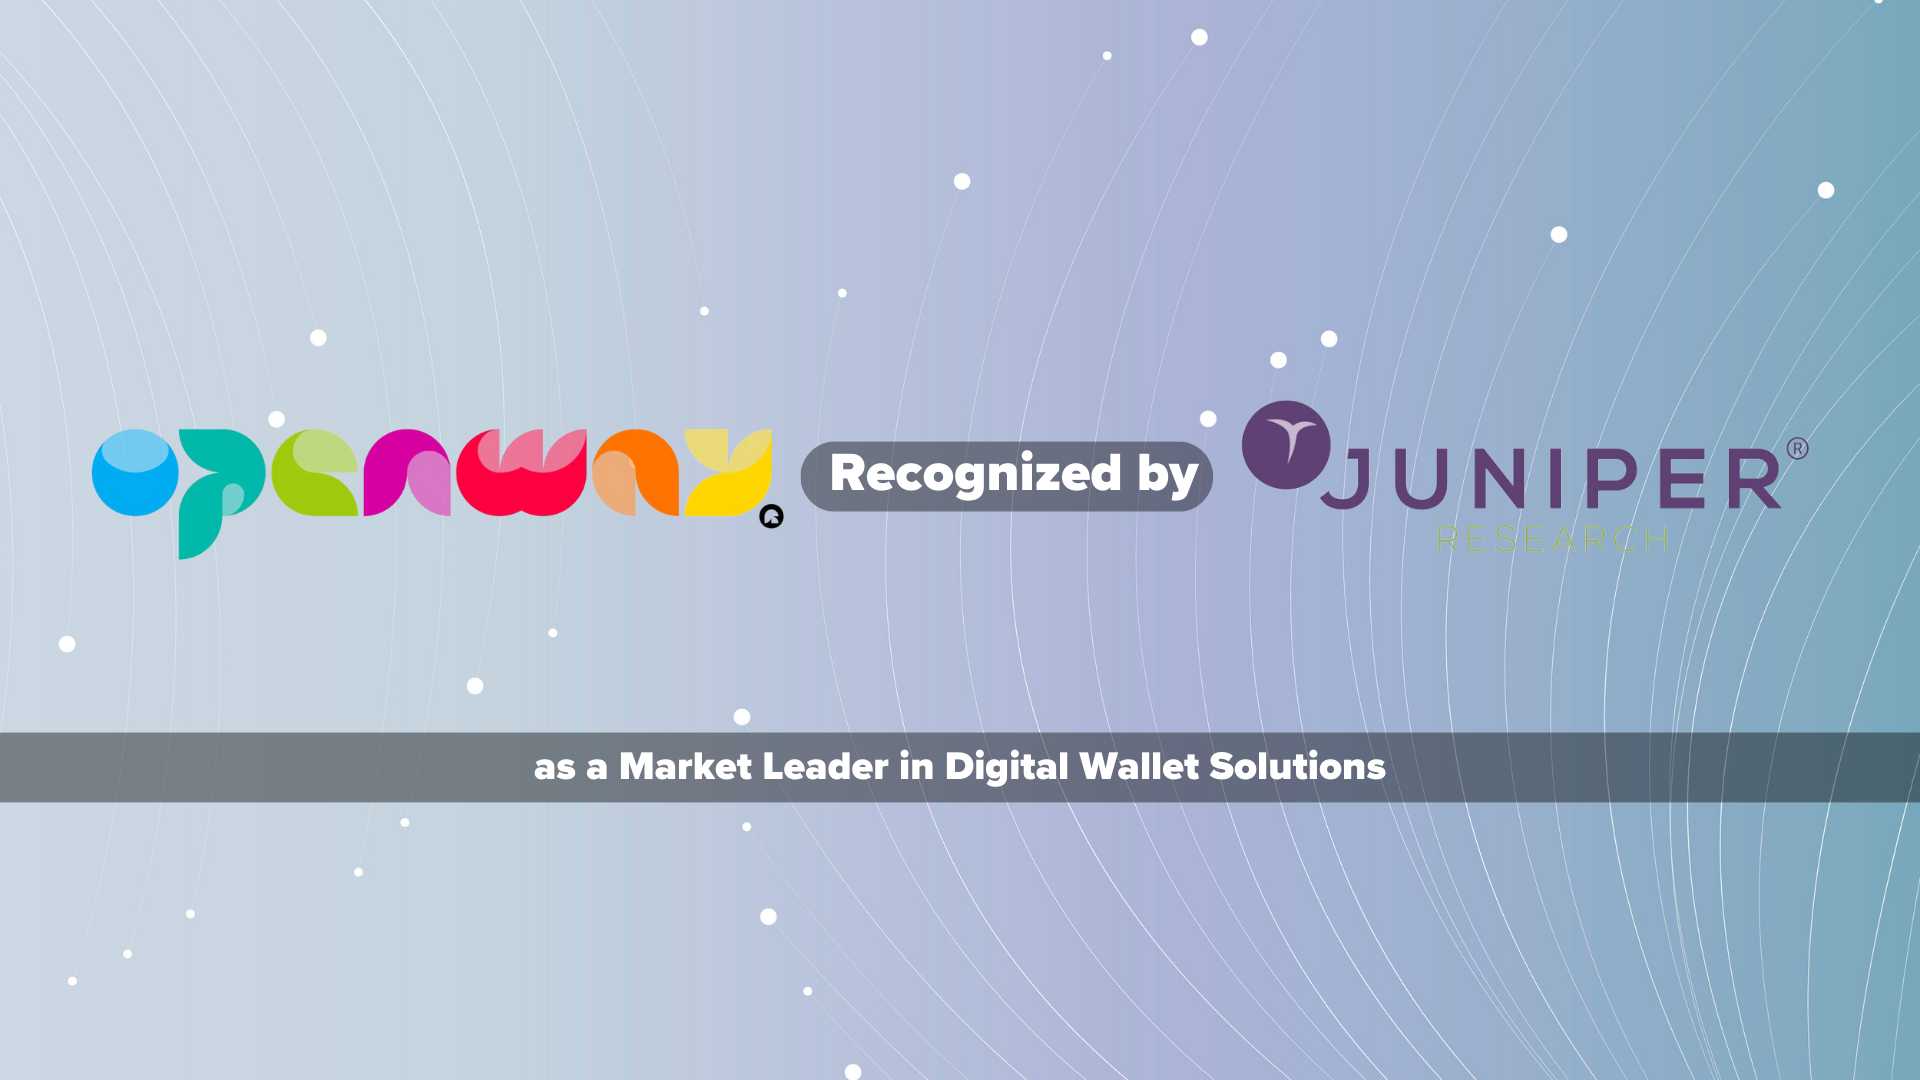 OpenWay reaffirms leadership in digital wallet software platforms for banks and fintechs, as recognized by Juniper Research